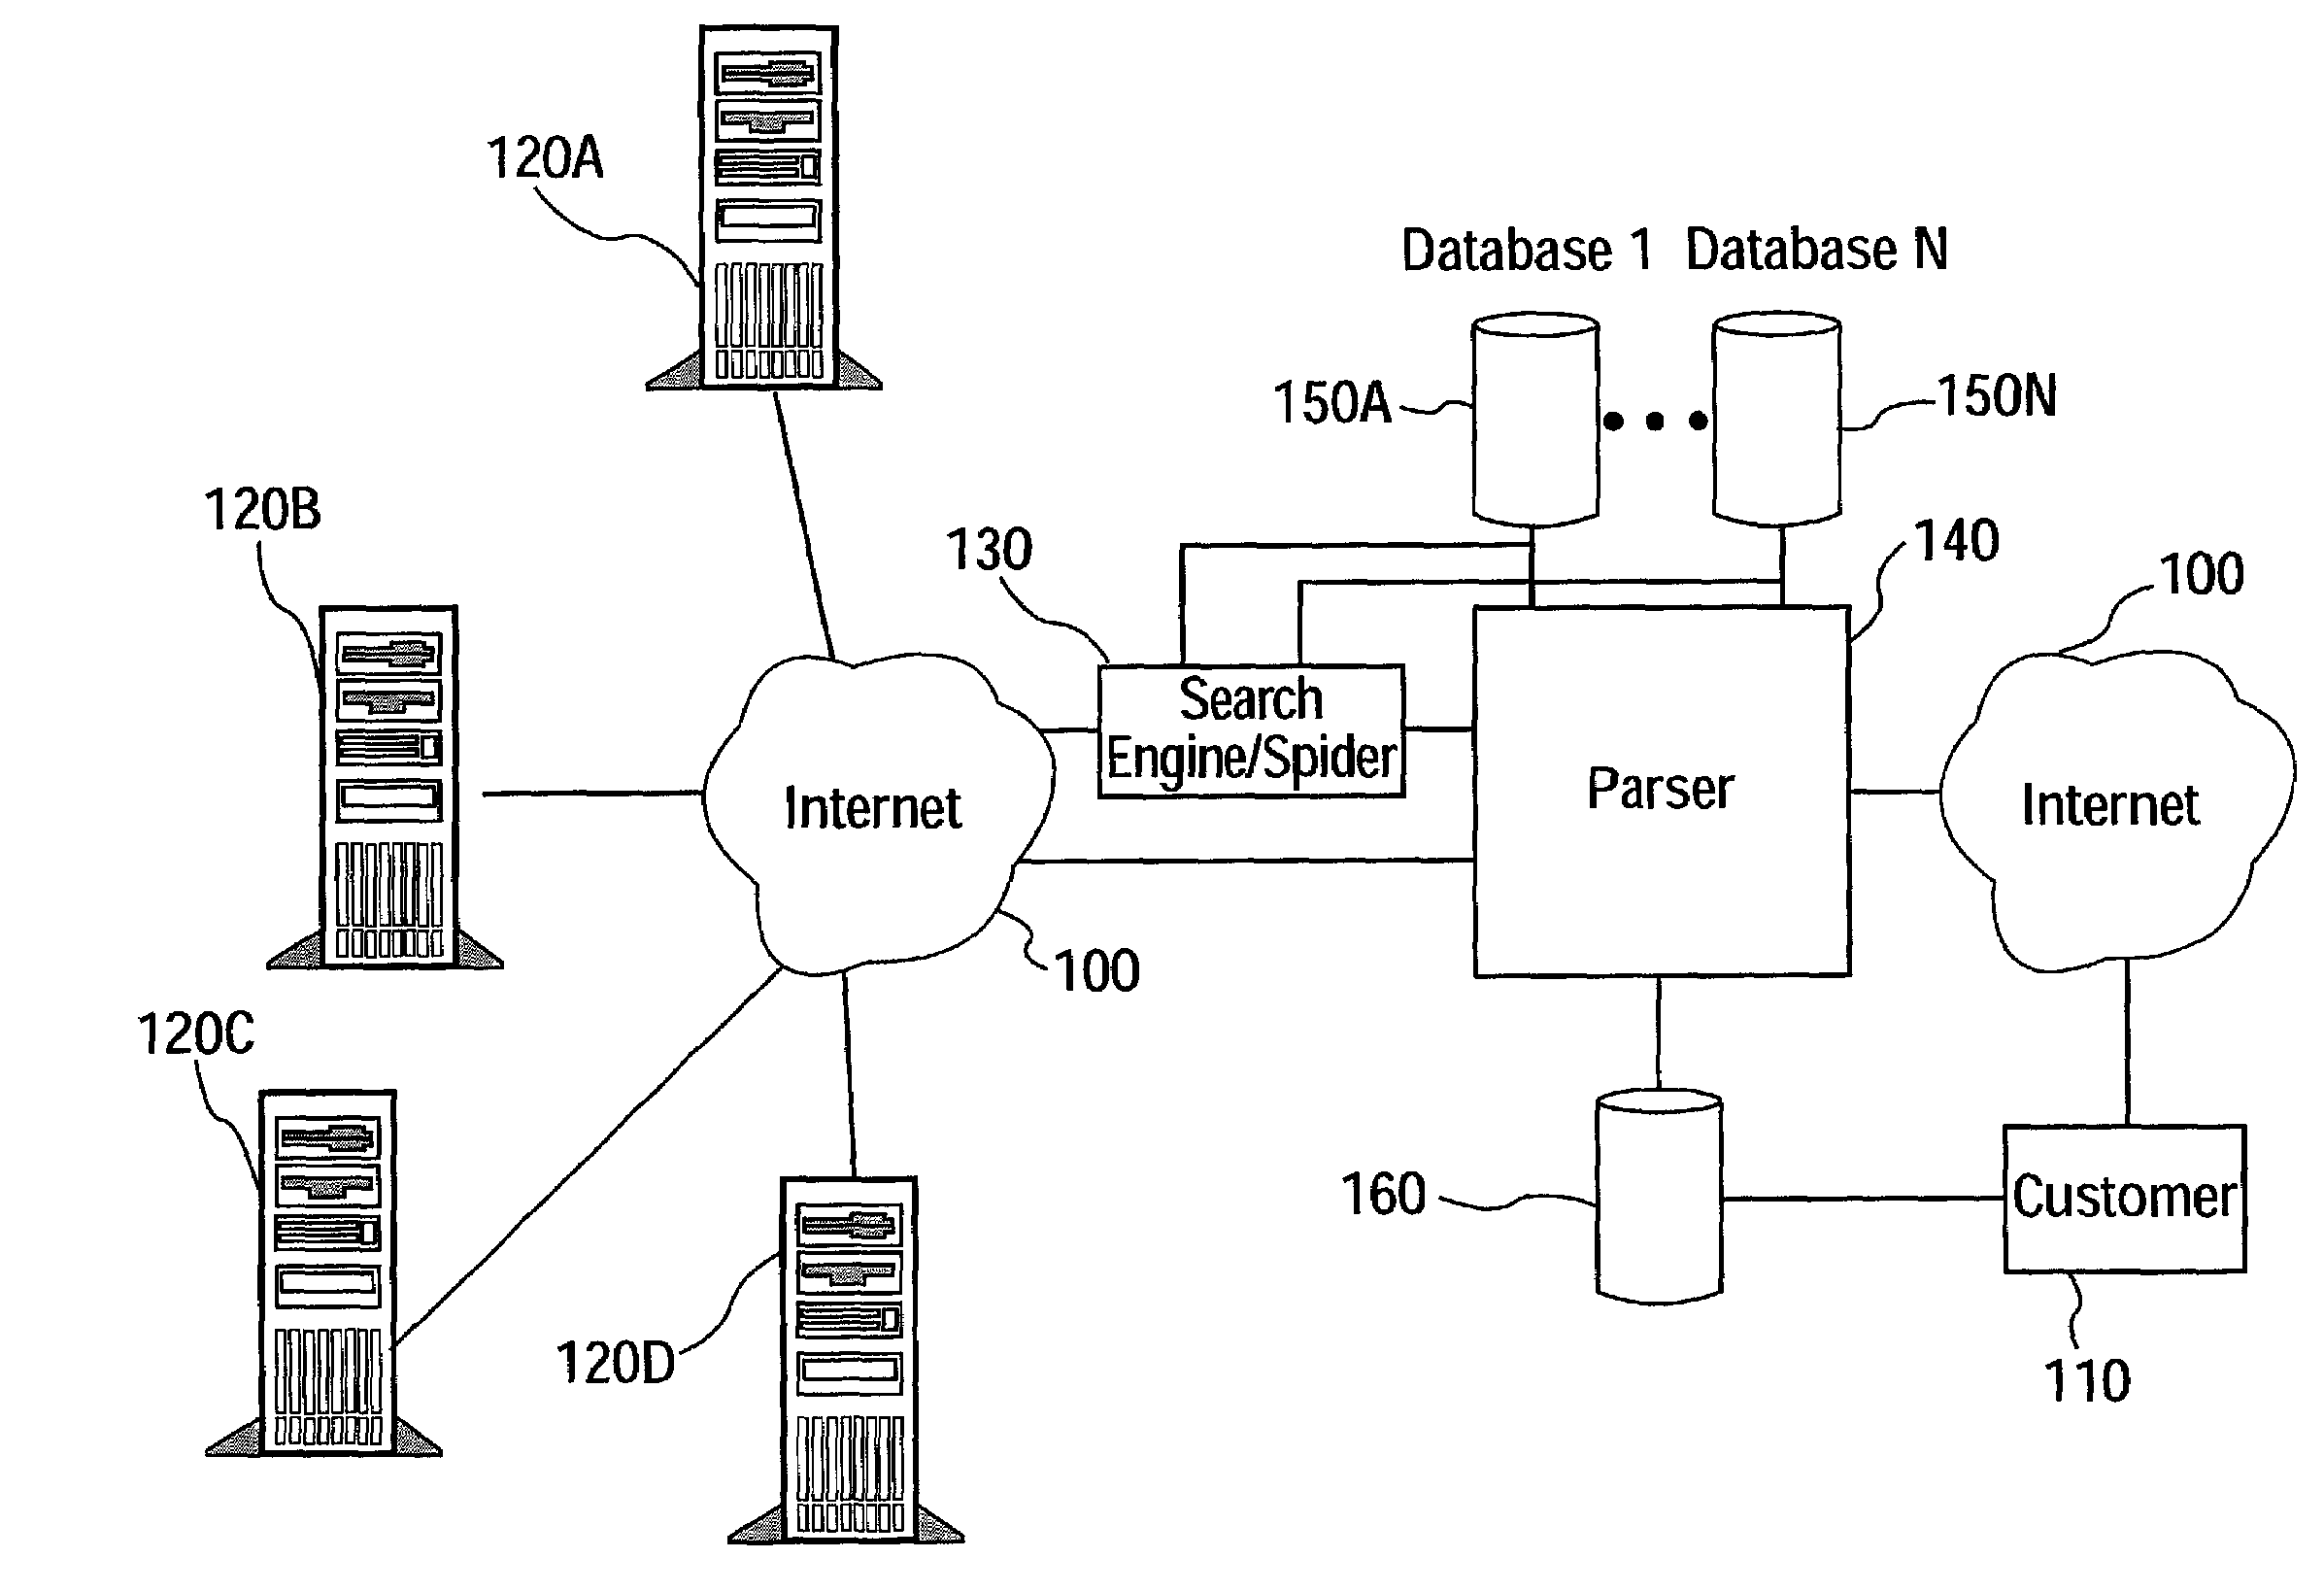 Method and apparatus for compiling business data